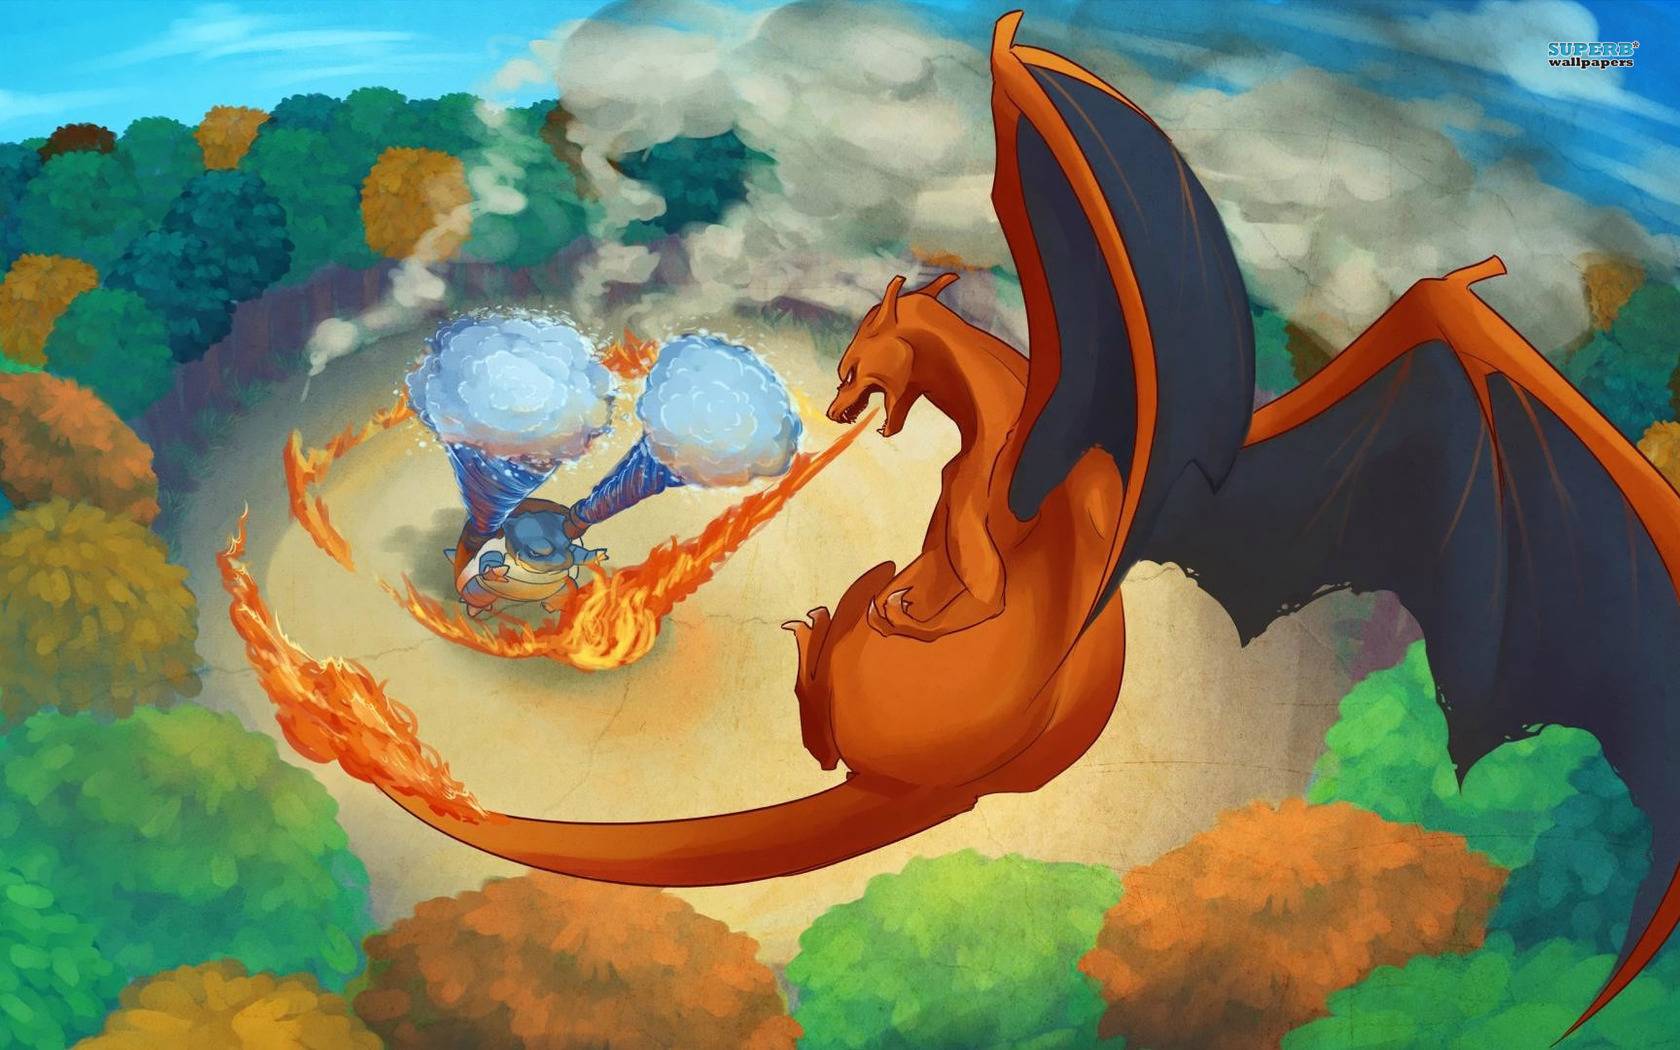 Blastoise And Charizard In A Fight